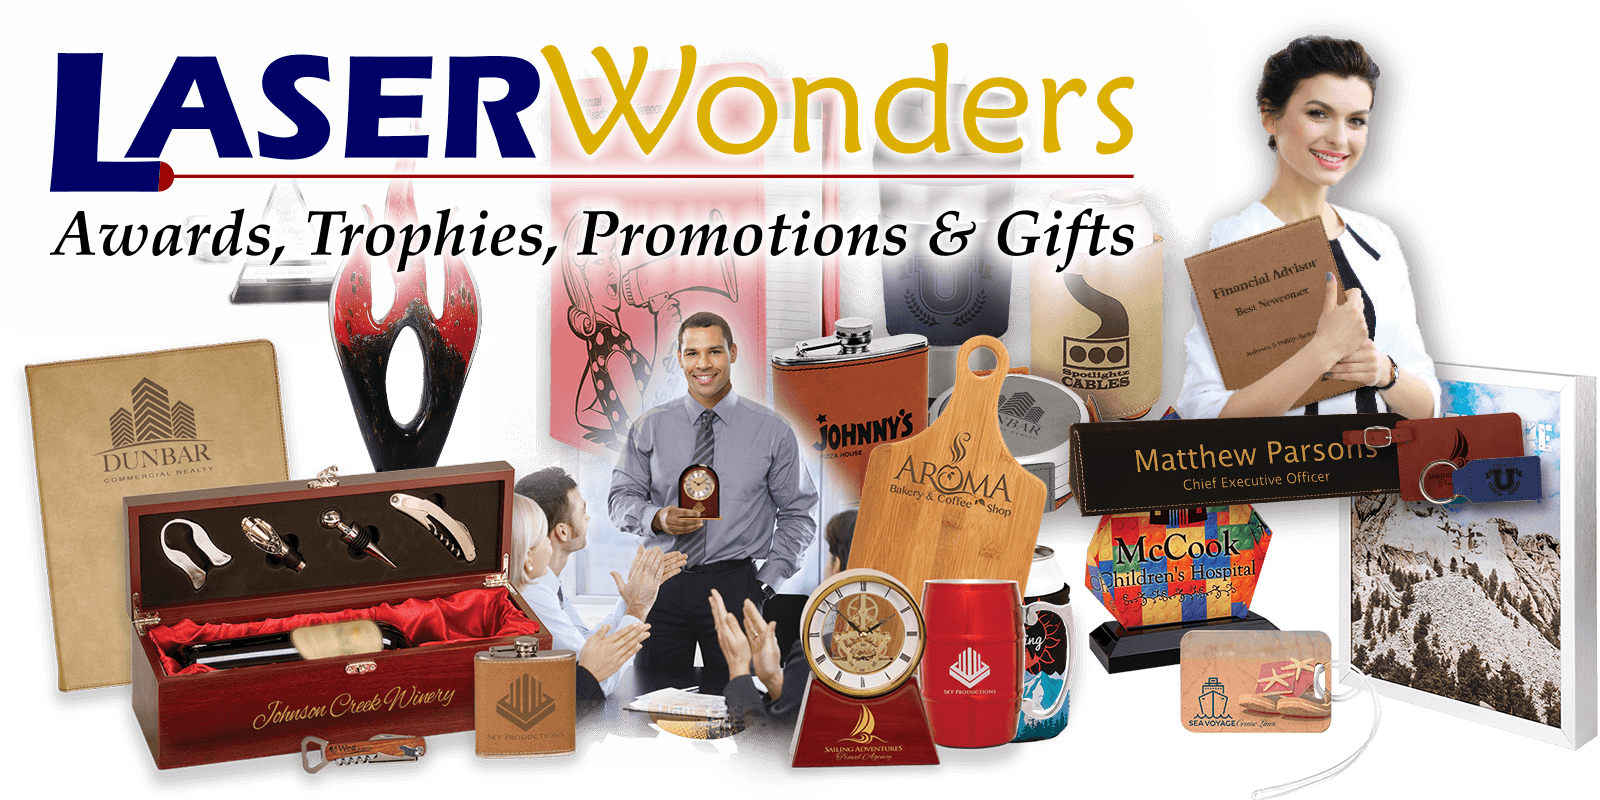 Laser Wonders - Awards, Trophies, Promotions, & Gifts